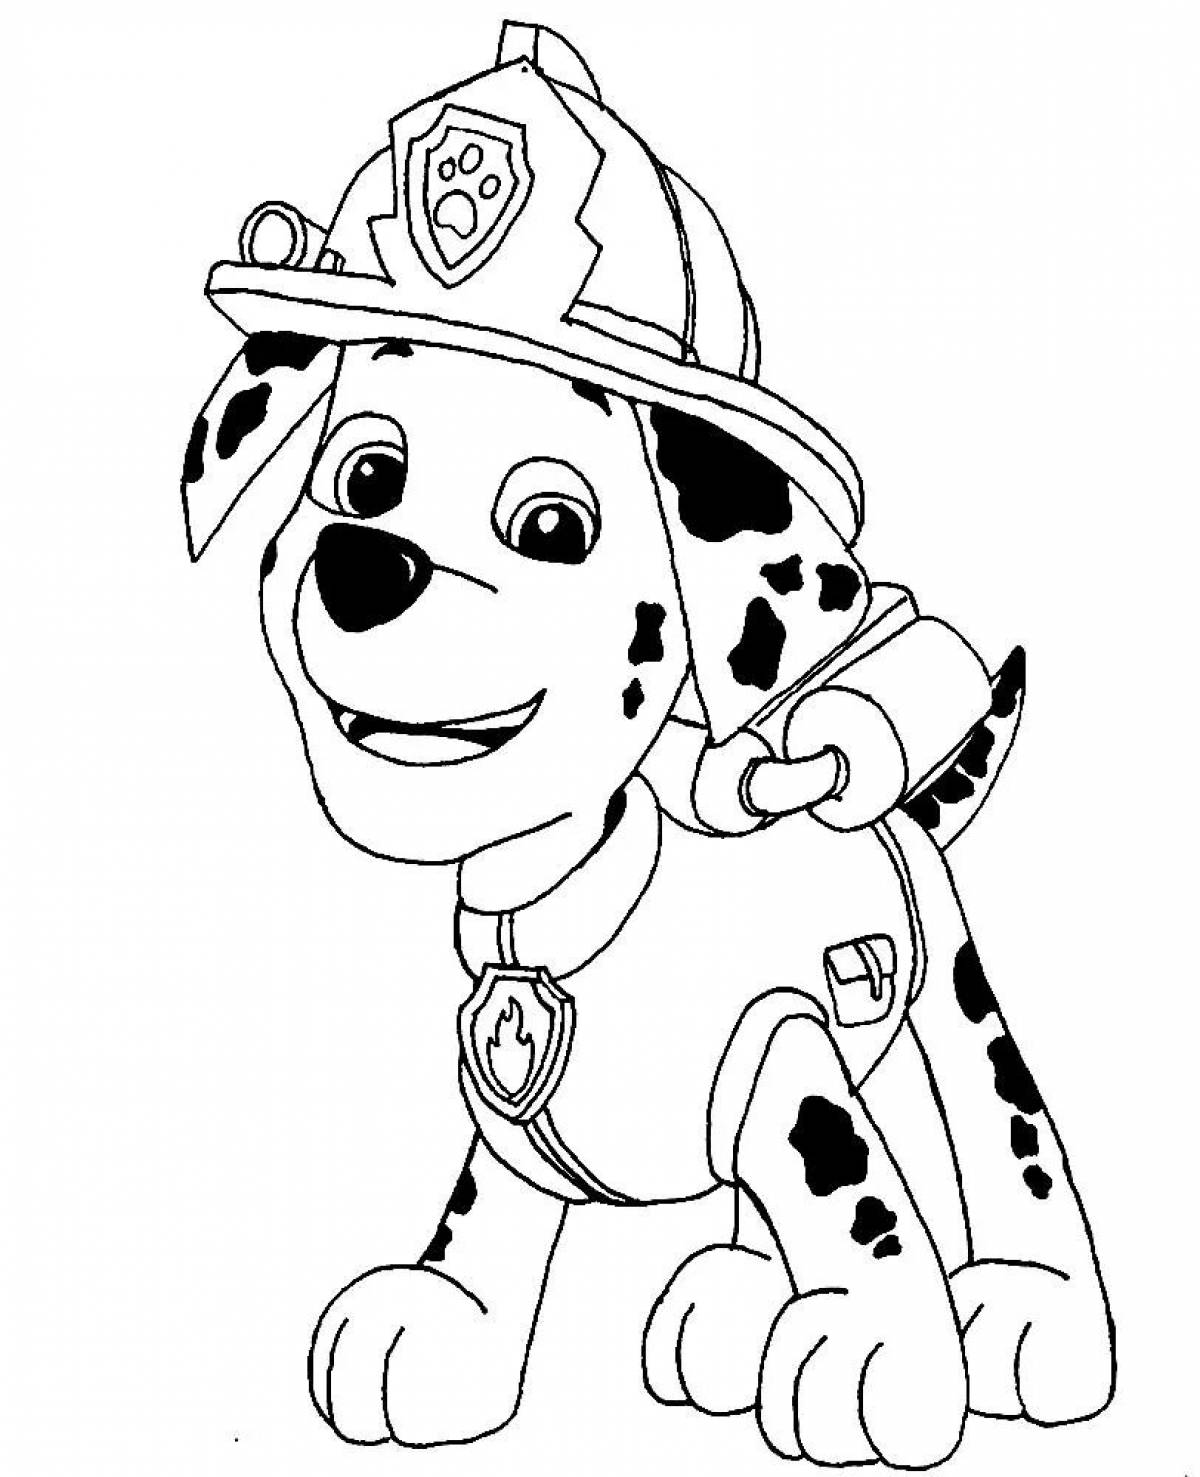 Charming marshal coloring book for kids